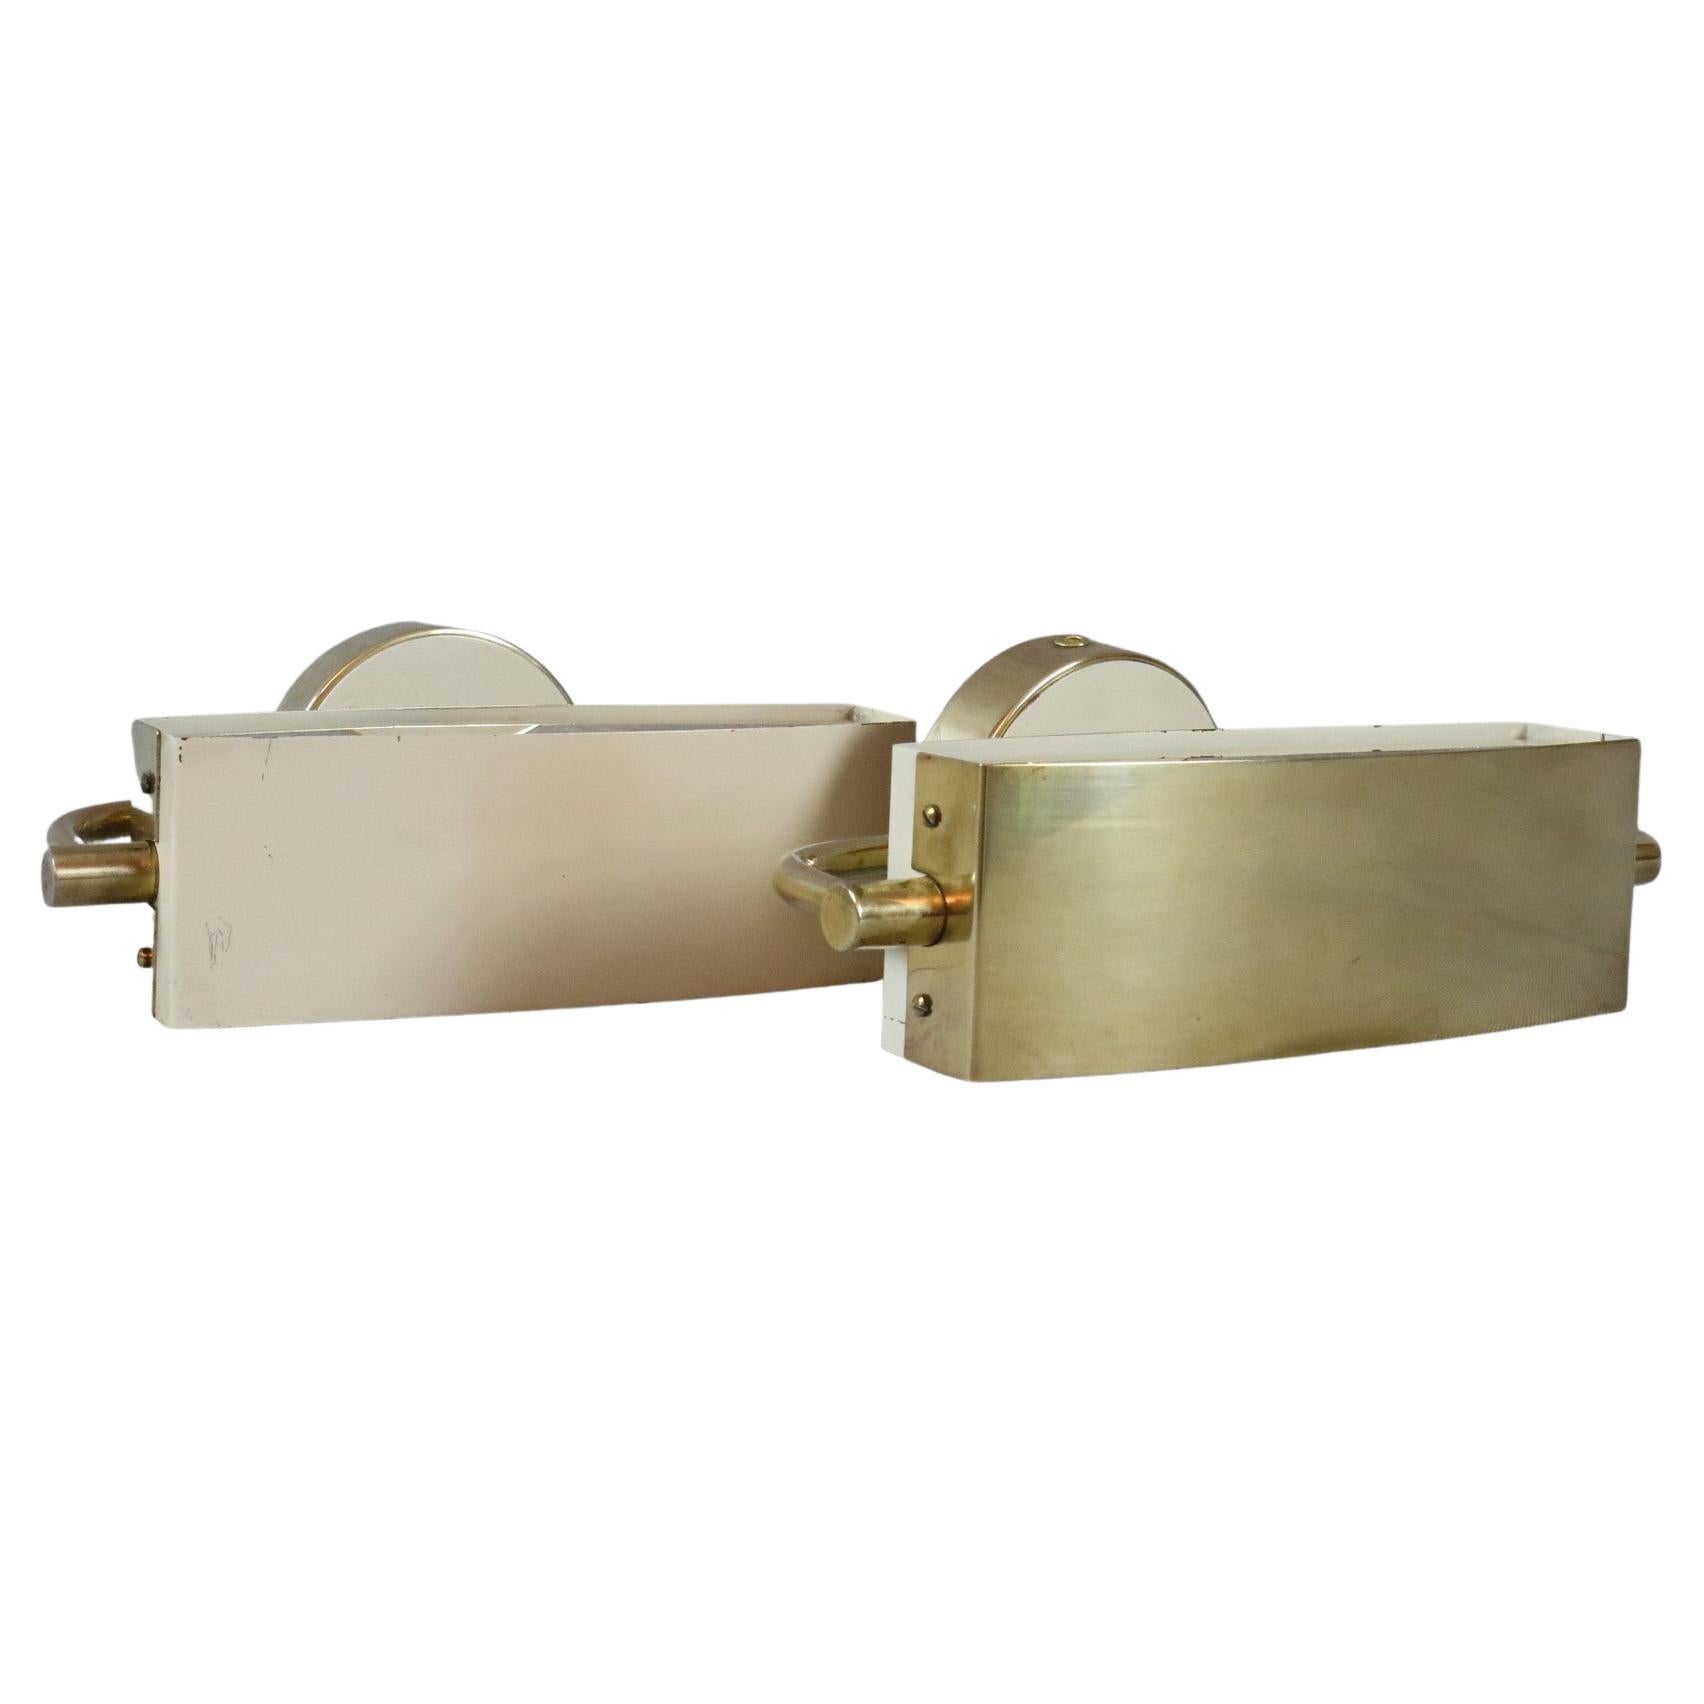 French Rare Jacques Biny Pair of Mid-century Sconces circa 1950 Era Perriand, Guariche